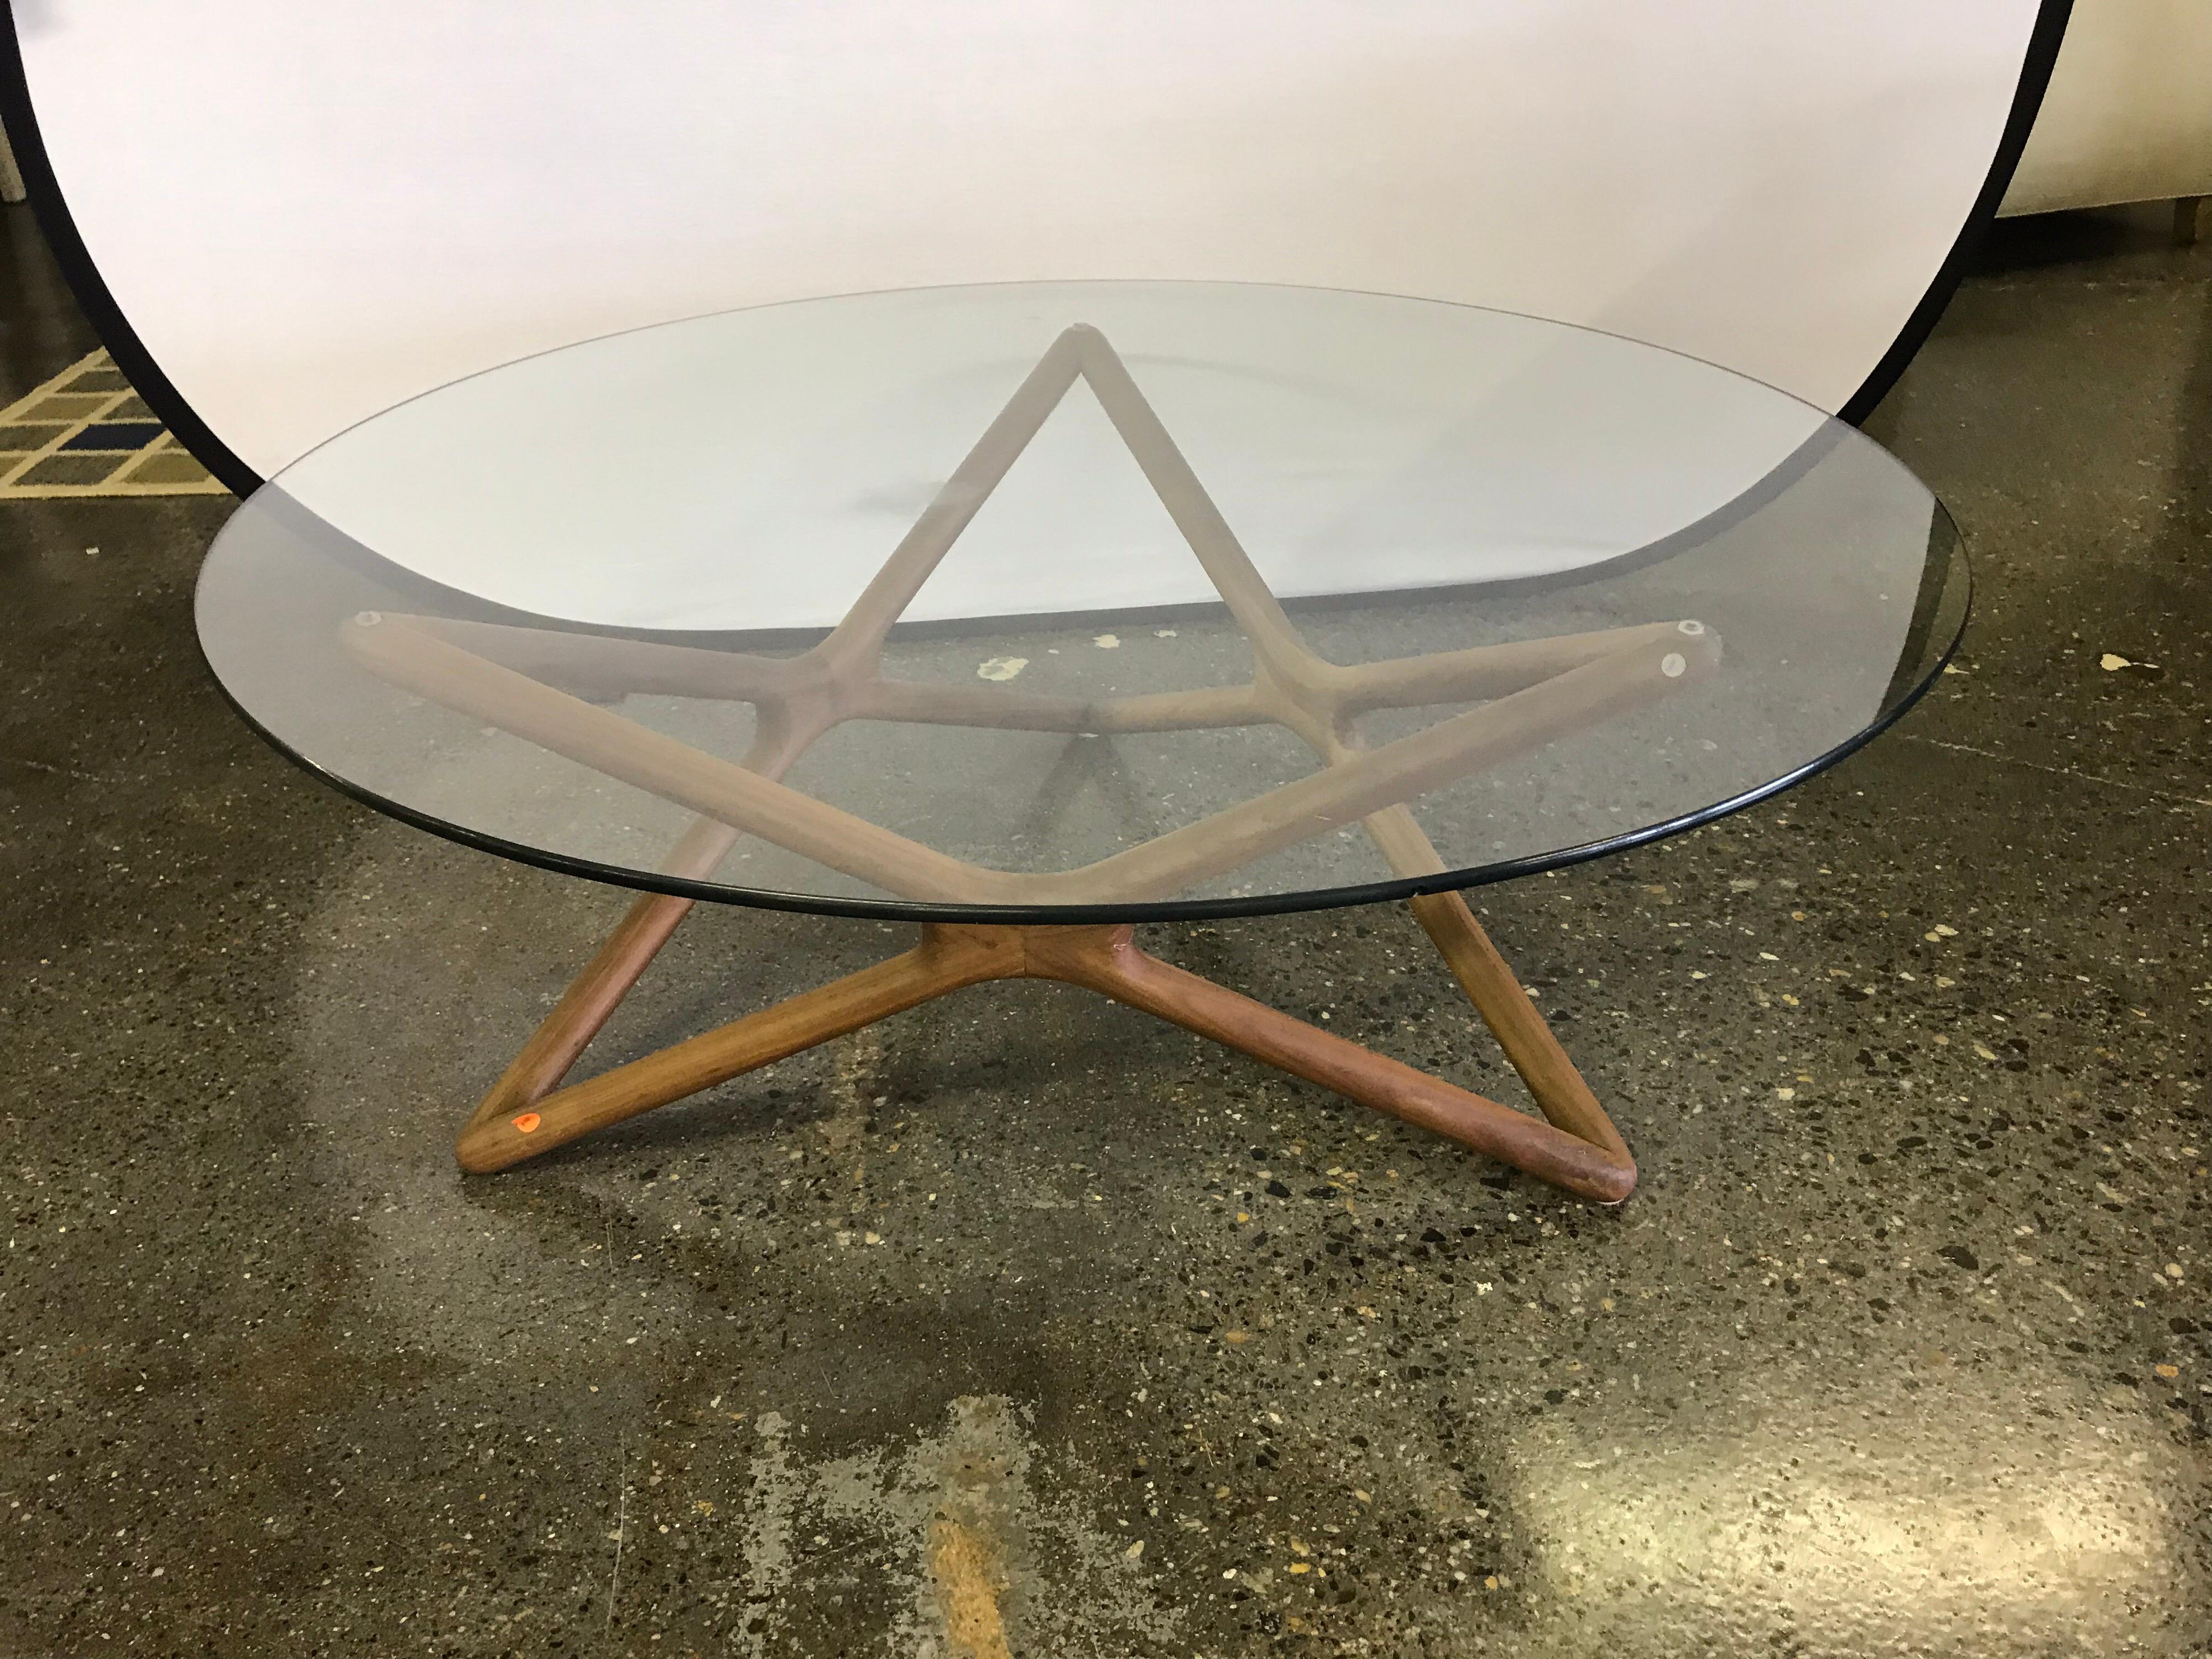 Elegant and timeless Danish modern round coffee table with teak base and removable glass top.